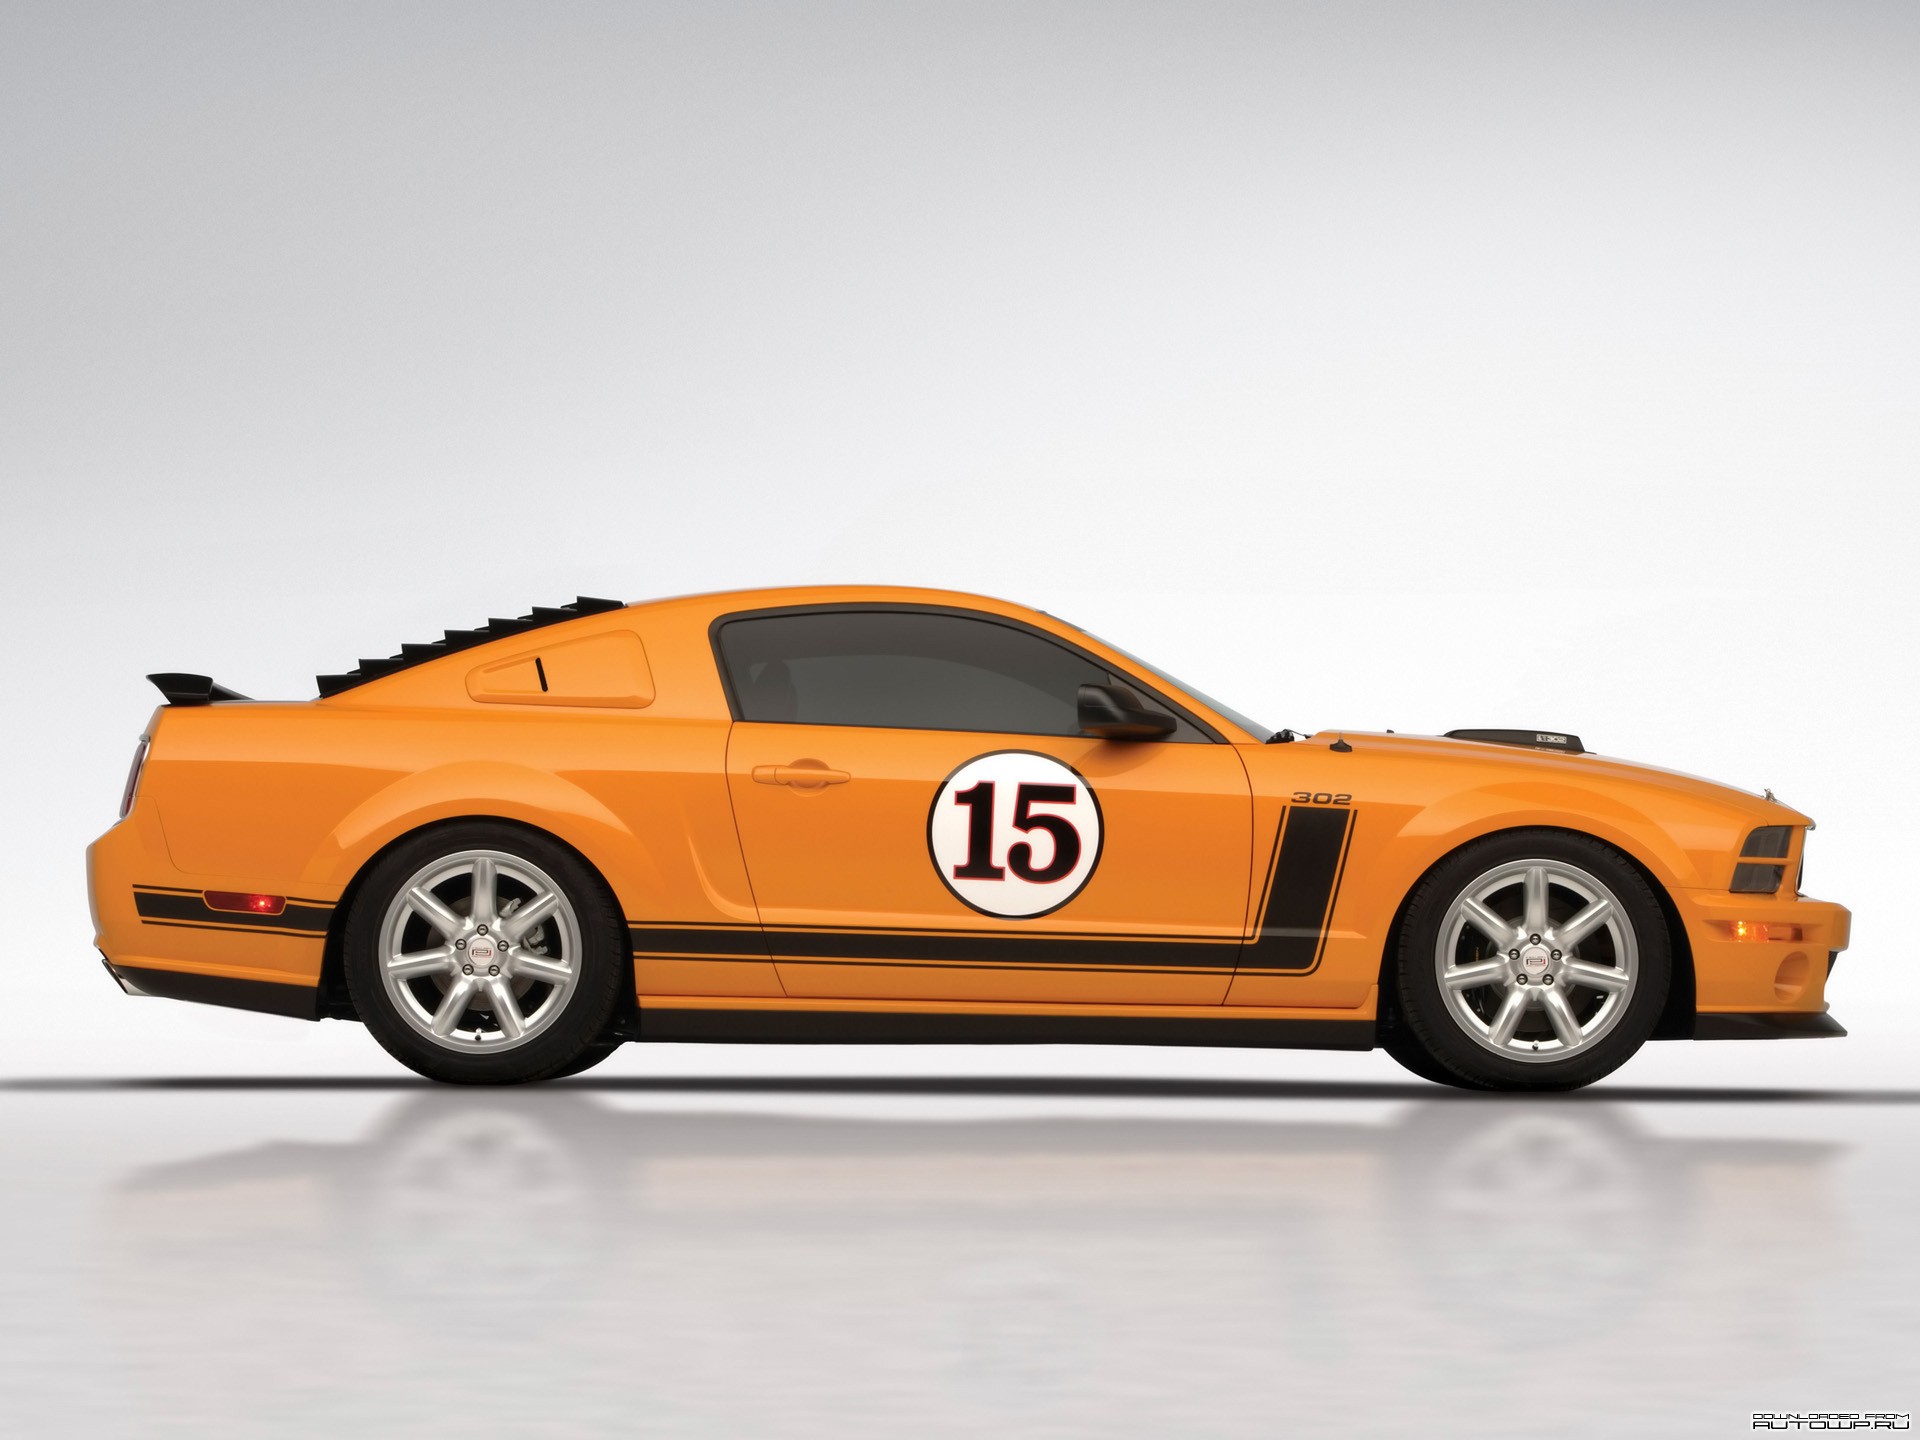 General 1920x1440 car vehicle orange cars Ford Ford Mustang muscle cars American cars